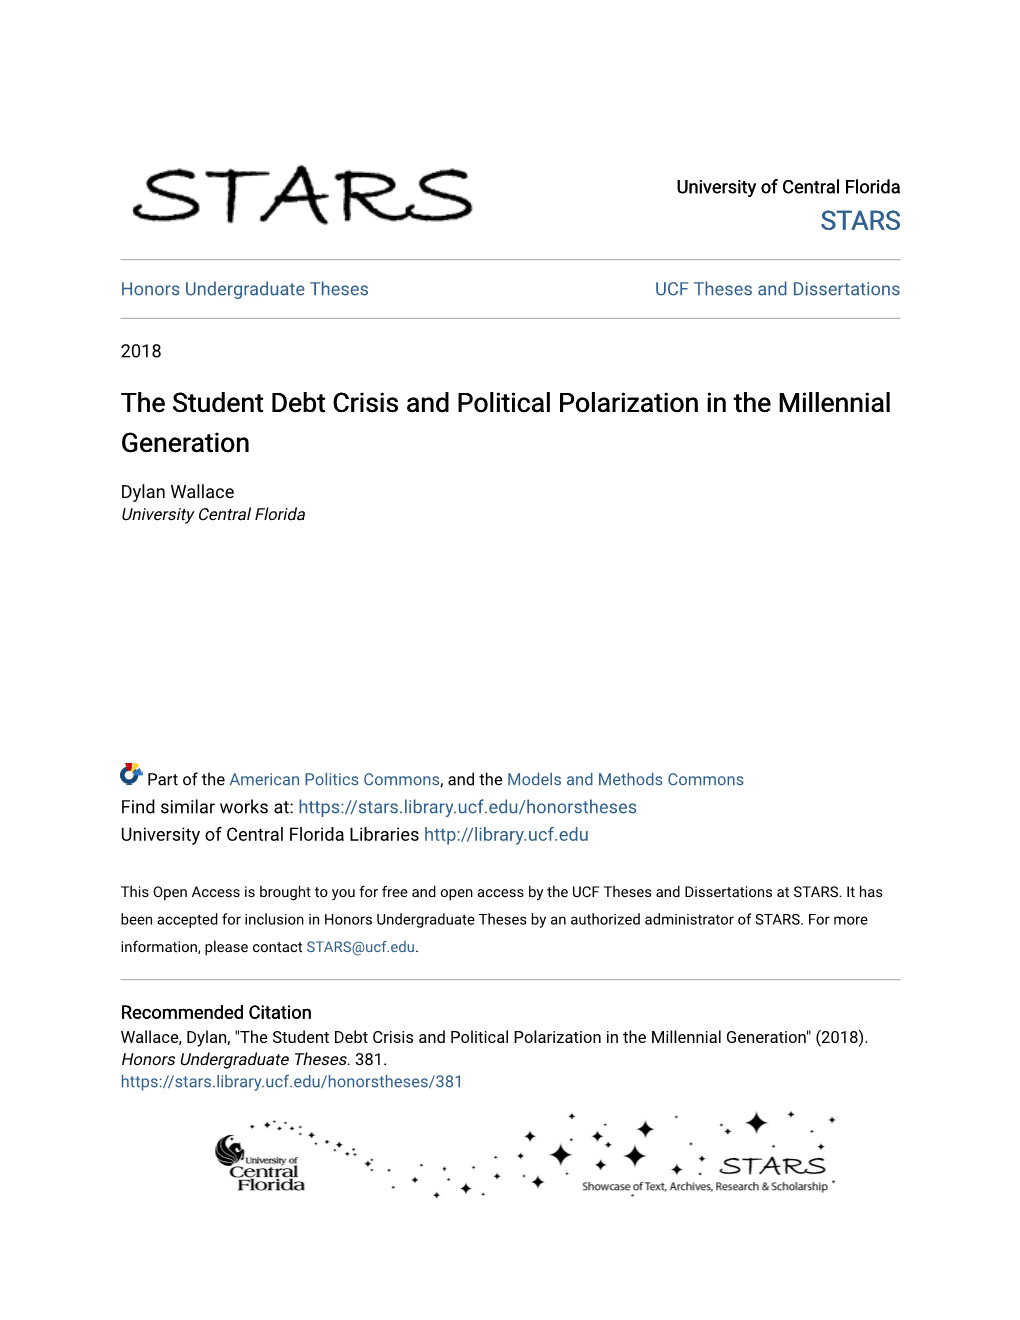 The Student Debt Crisis and Political Polarization in the Millennial Generation